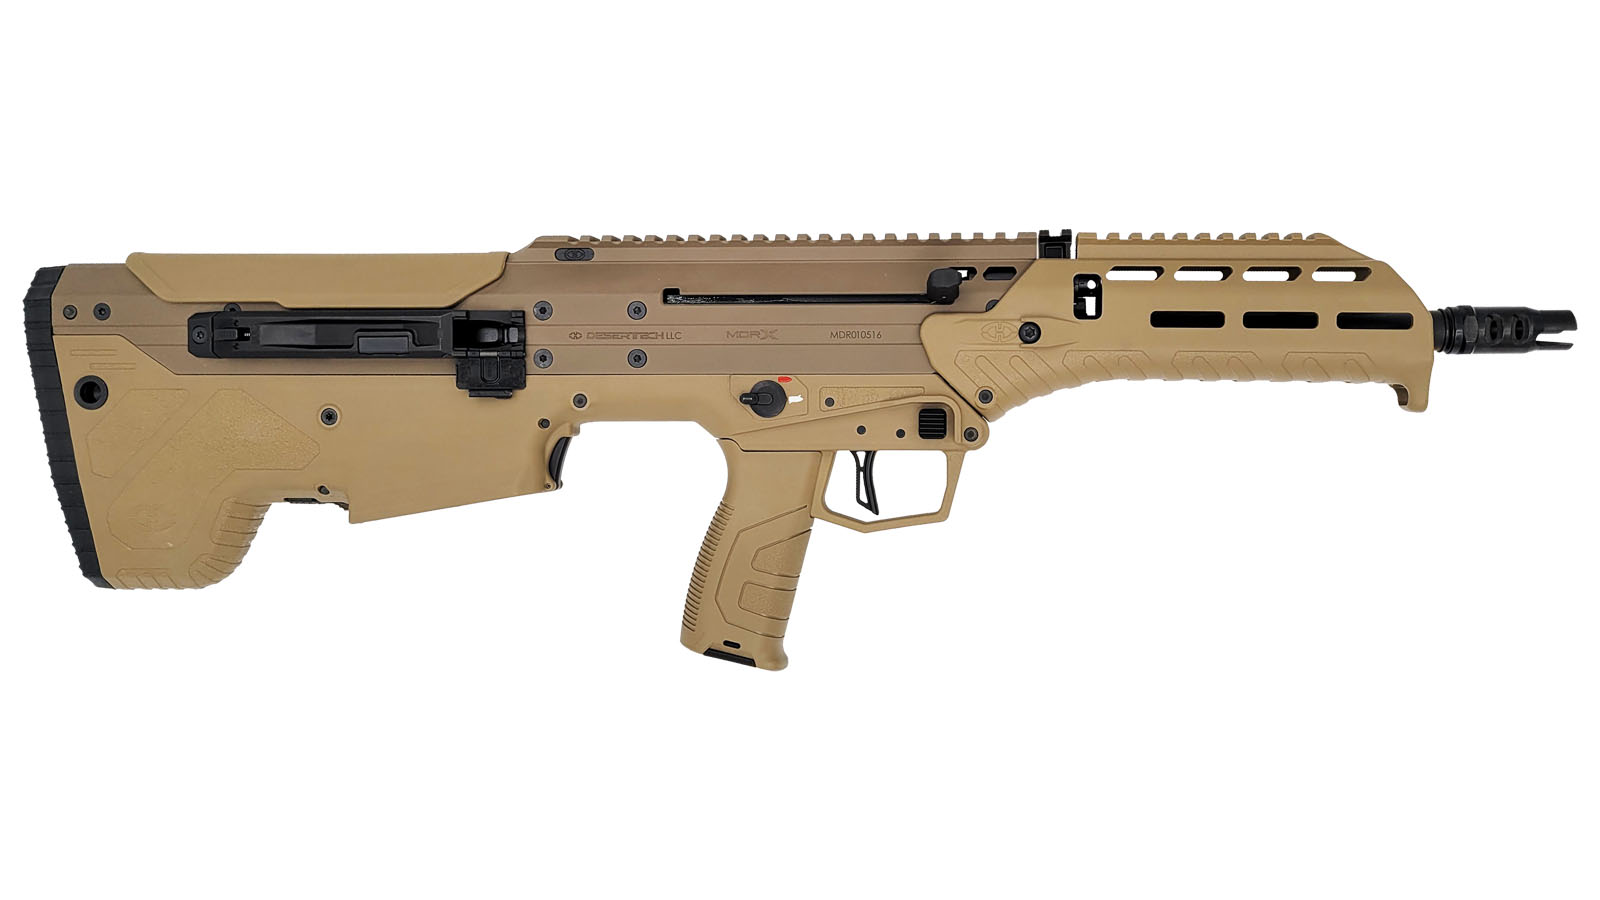 MDRx Rifle, 762NATO 308Win 16" 10rd Forward-Ejection FDE